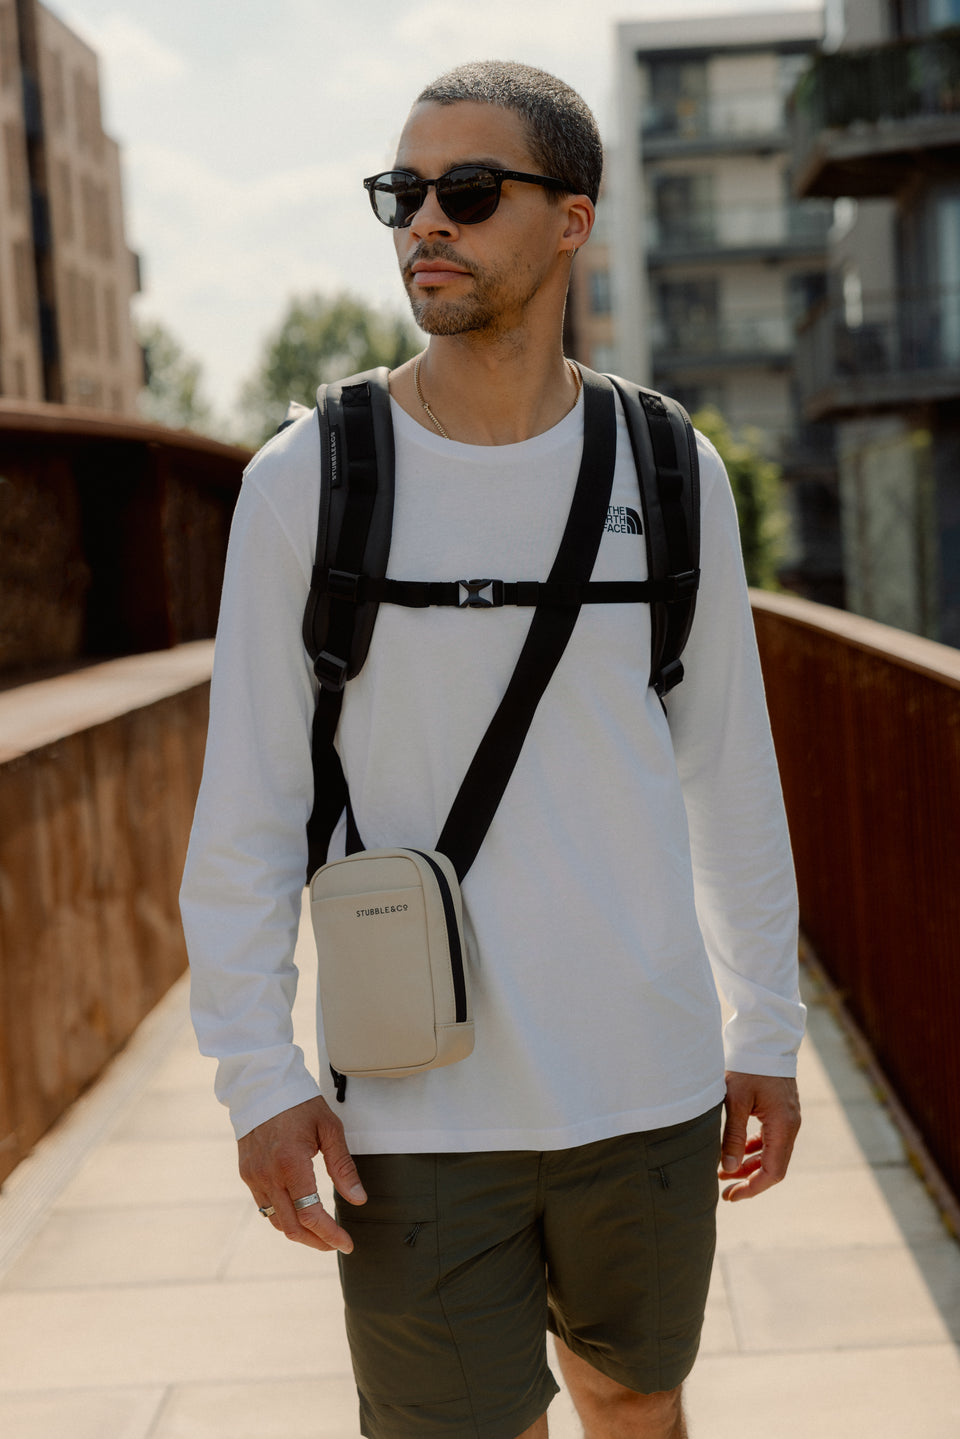 A male model wearing a roll top and sand shoulder bag